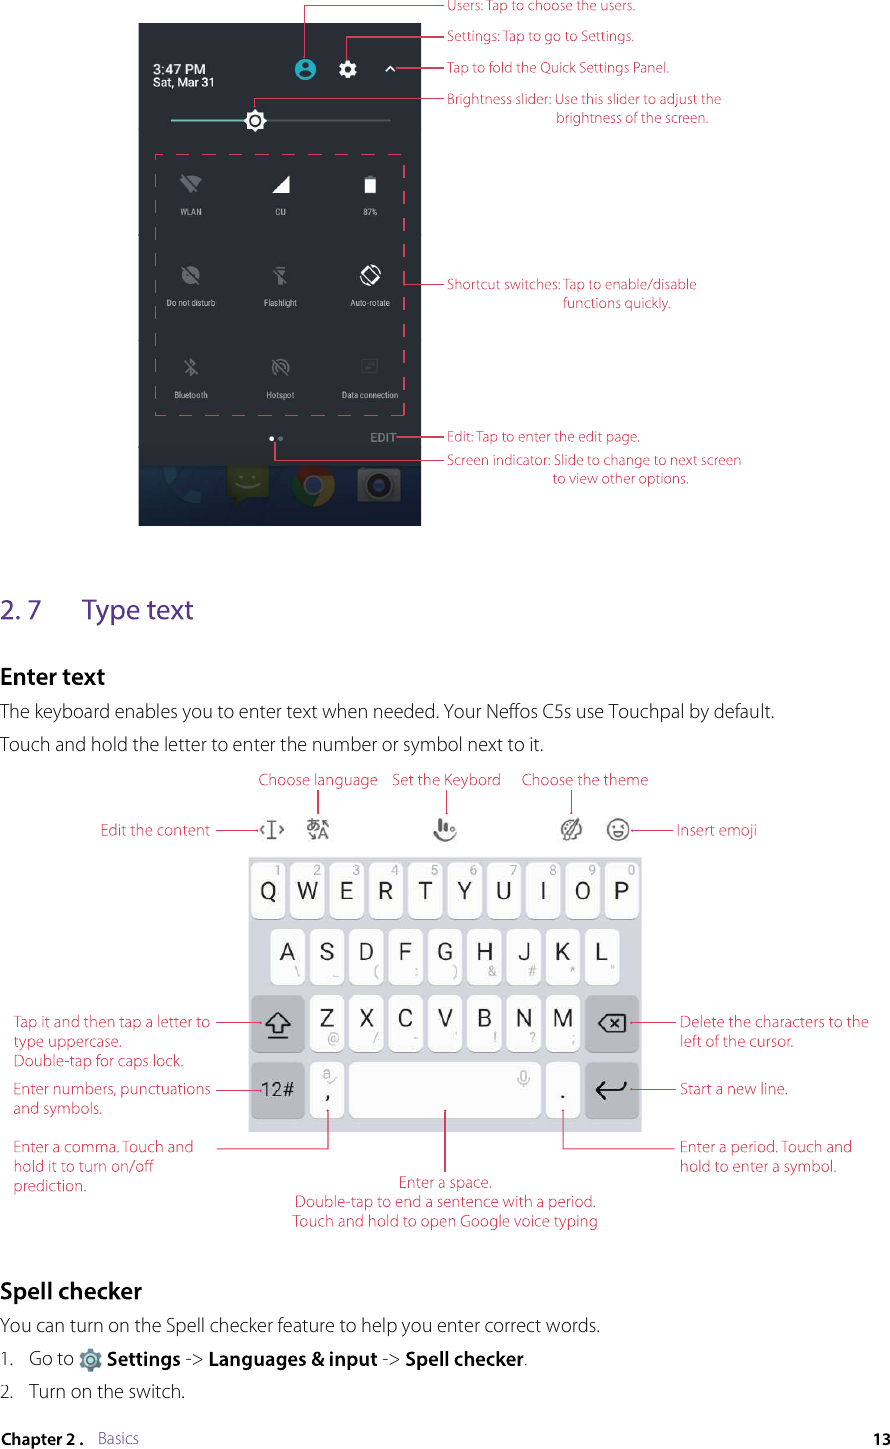 BasicsThe keyboard enables you to enter text when needed. Your Neffos C5s use Touchpal by default.Touch and hold the letter to enter the number or symbol next to it.You can turn on the Spell checker feature to help you enter correct words.1.Go to  -&gt;  -&gt; .2.Turn on the switch.